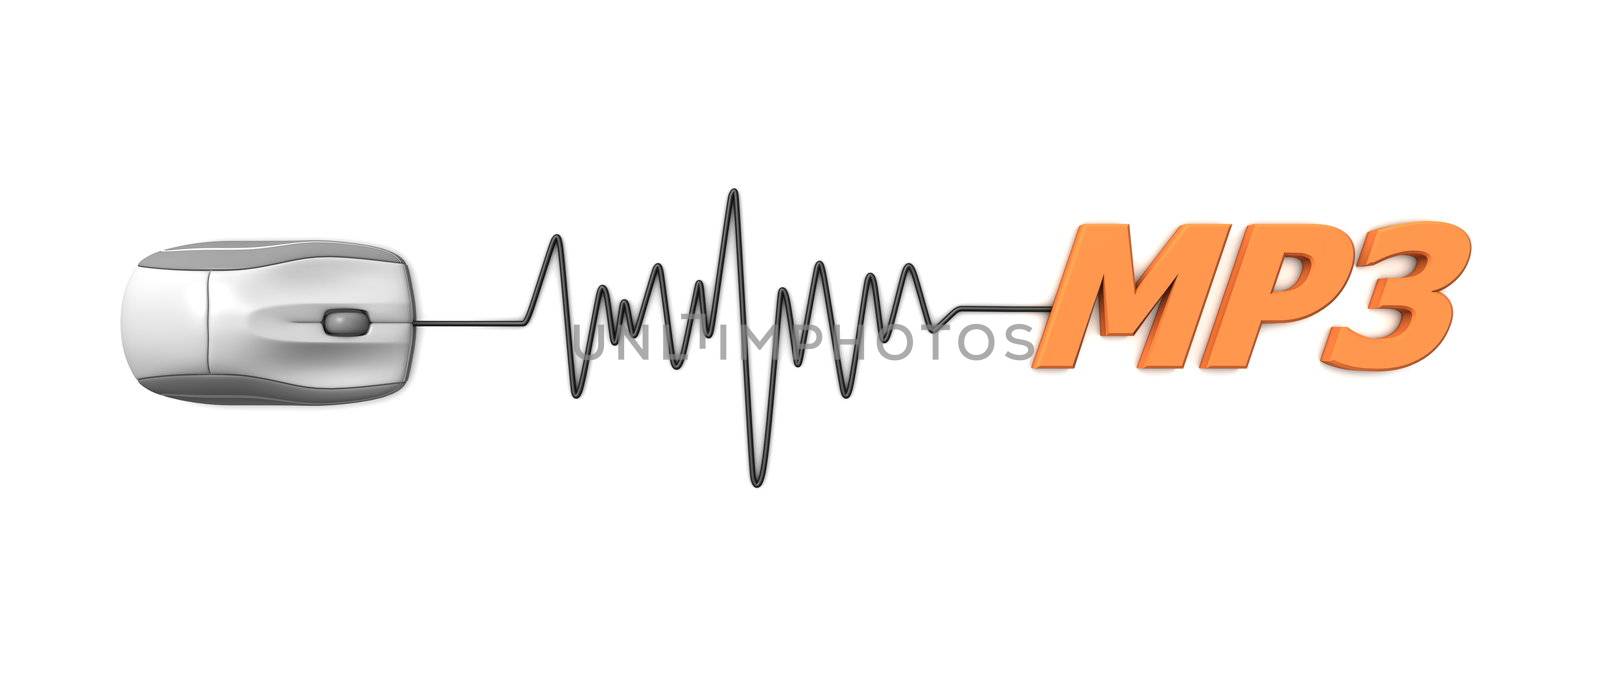 grey computer mouse connected to the orange word MP3 via sine waveform cable